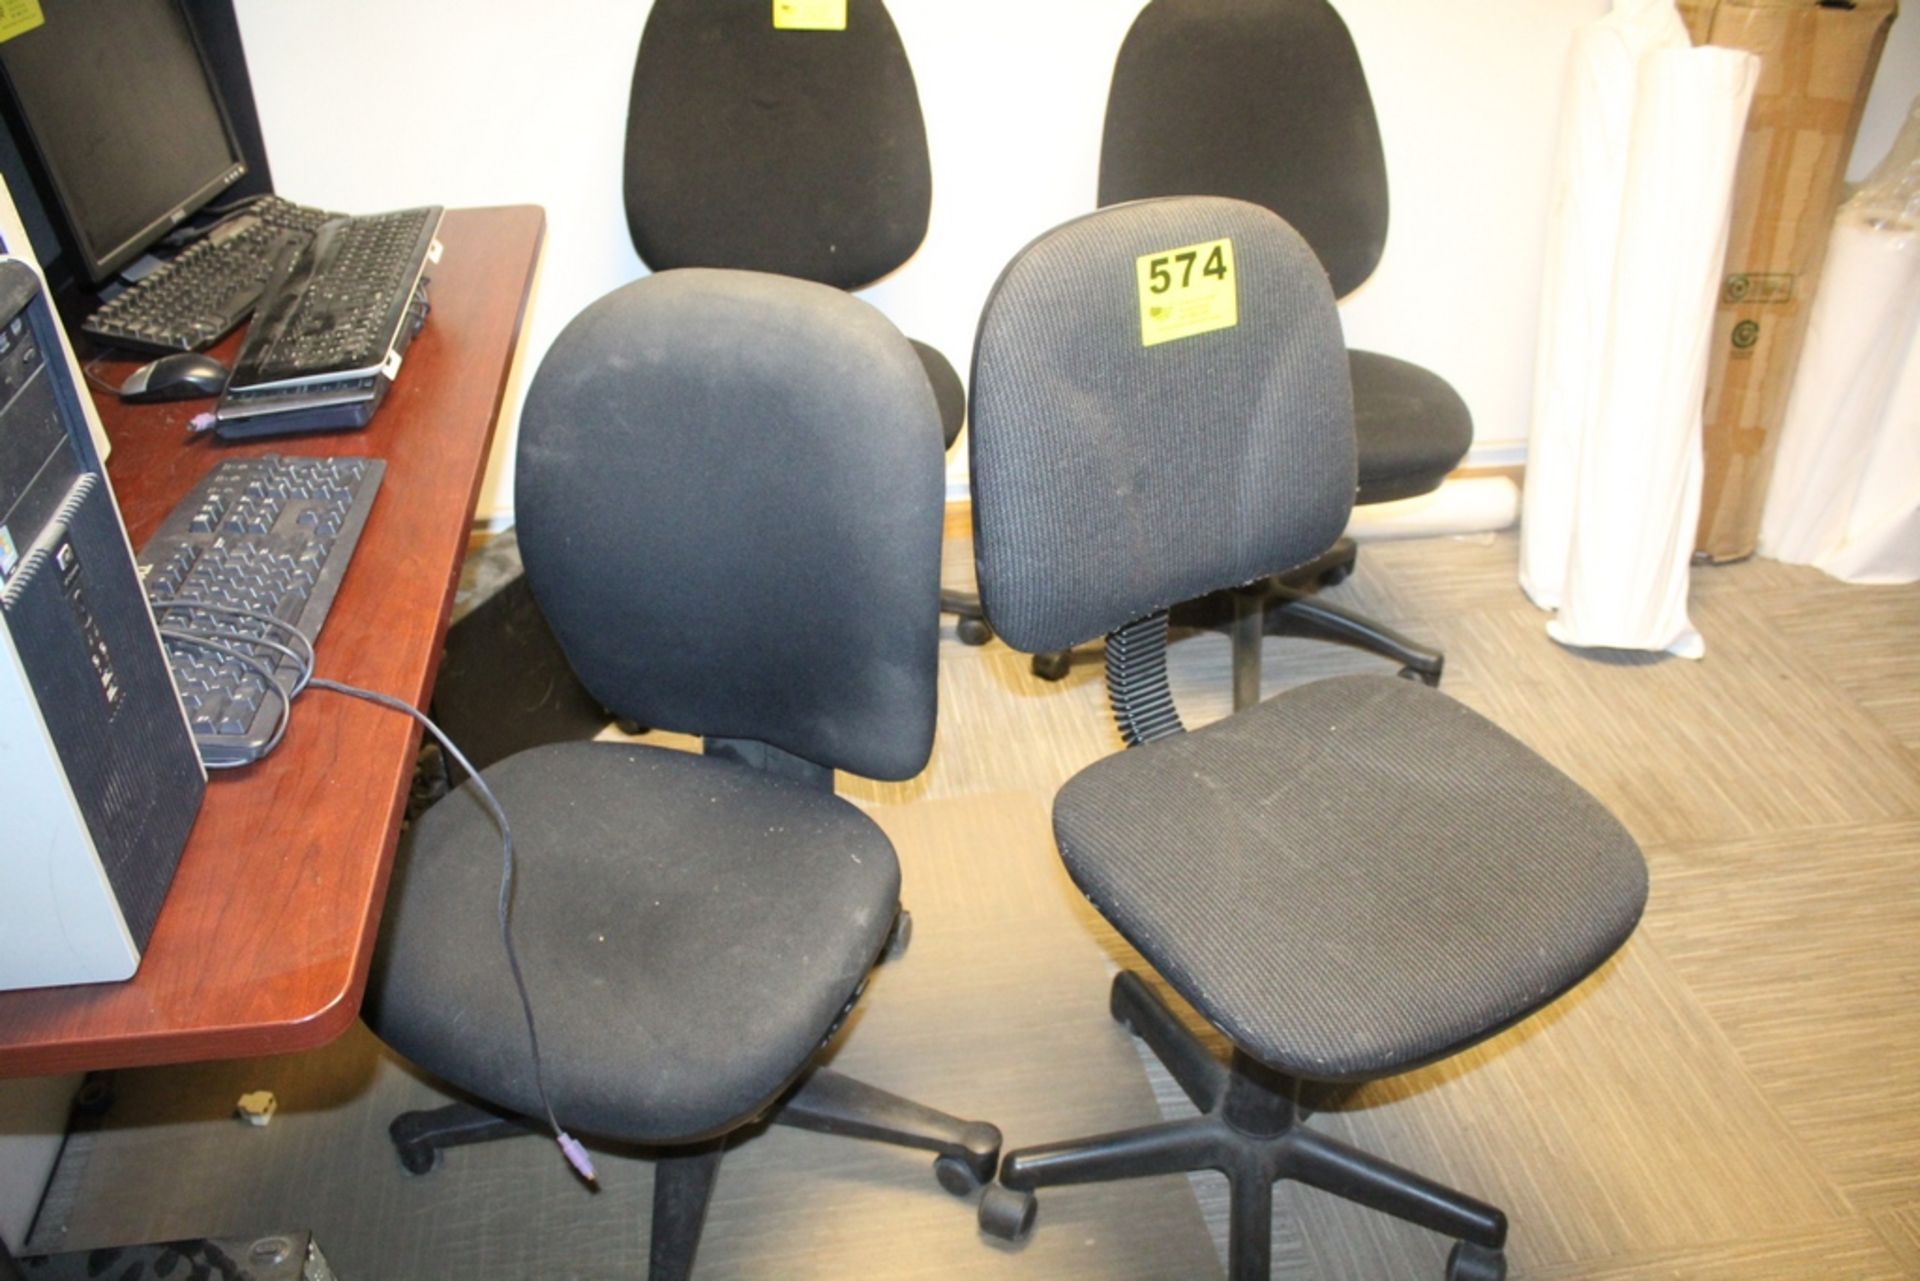 (2) POSTURE CHAIRS WITH CASTERS